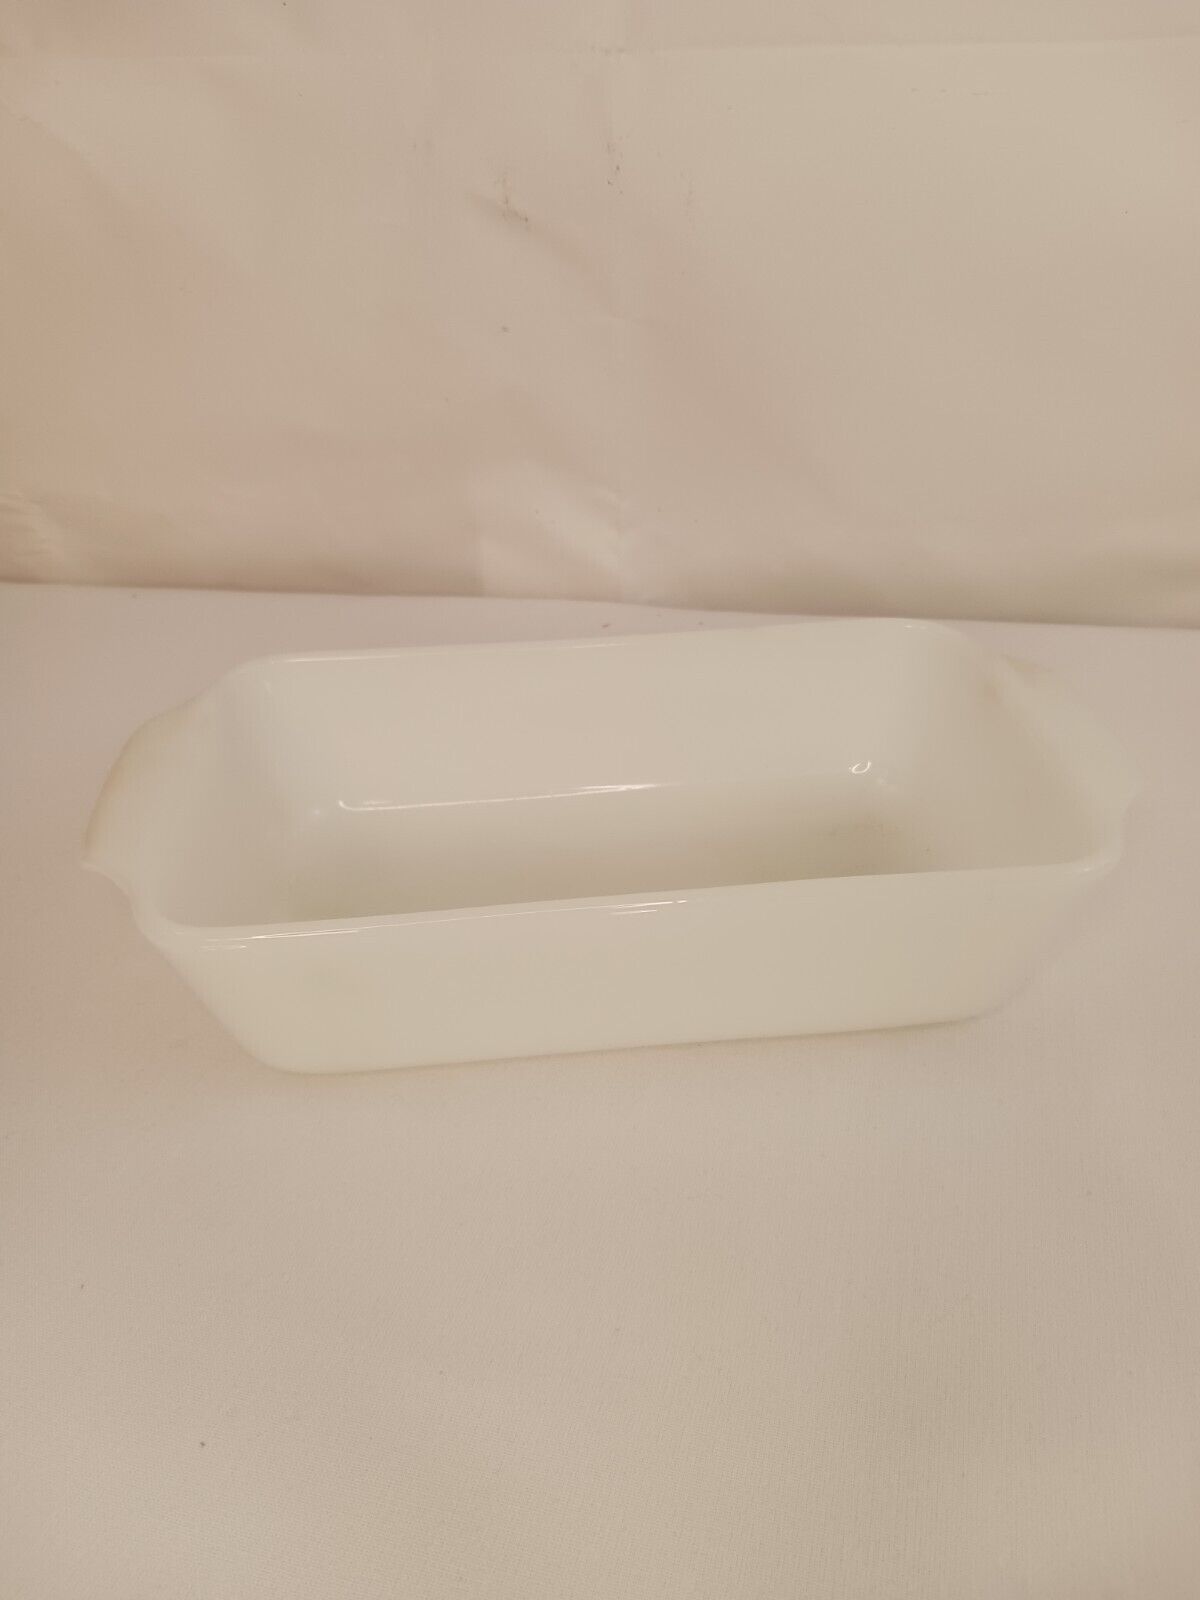 Vintage 1950s Fire King Ivory Loaf Pan Glass Oven Ware Baking Dish 9032